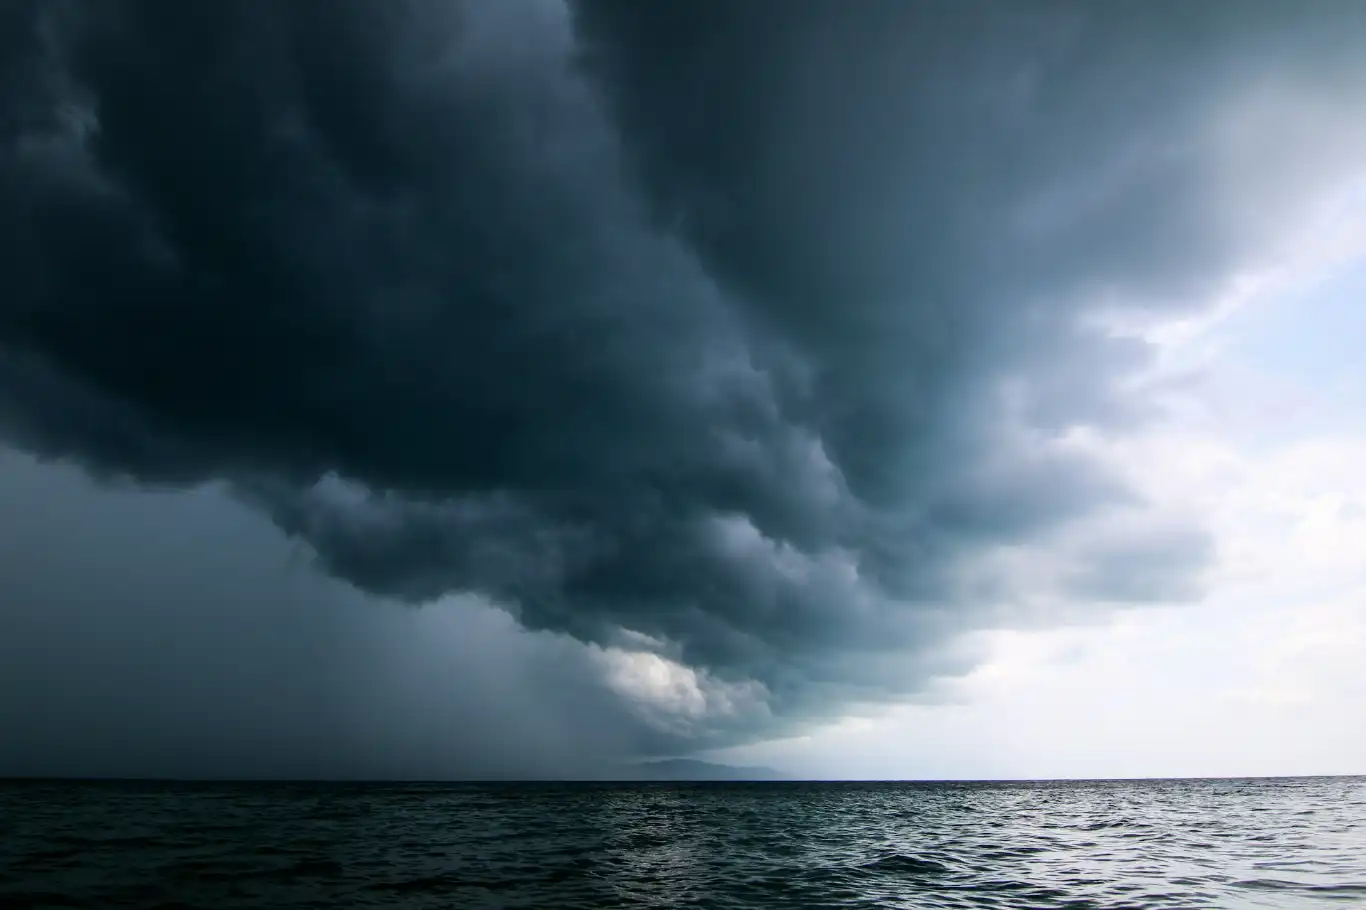 A dark storm cloud over a calm sea in Thailand, signaling an approaching storm.